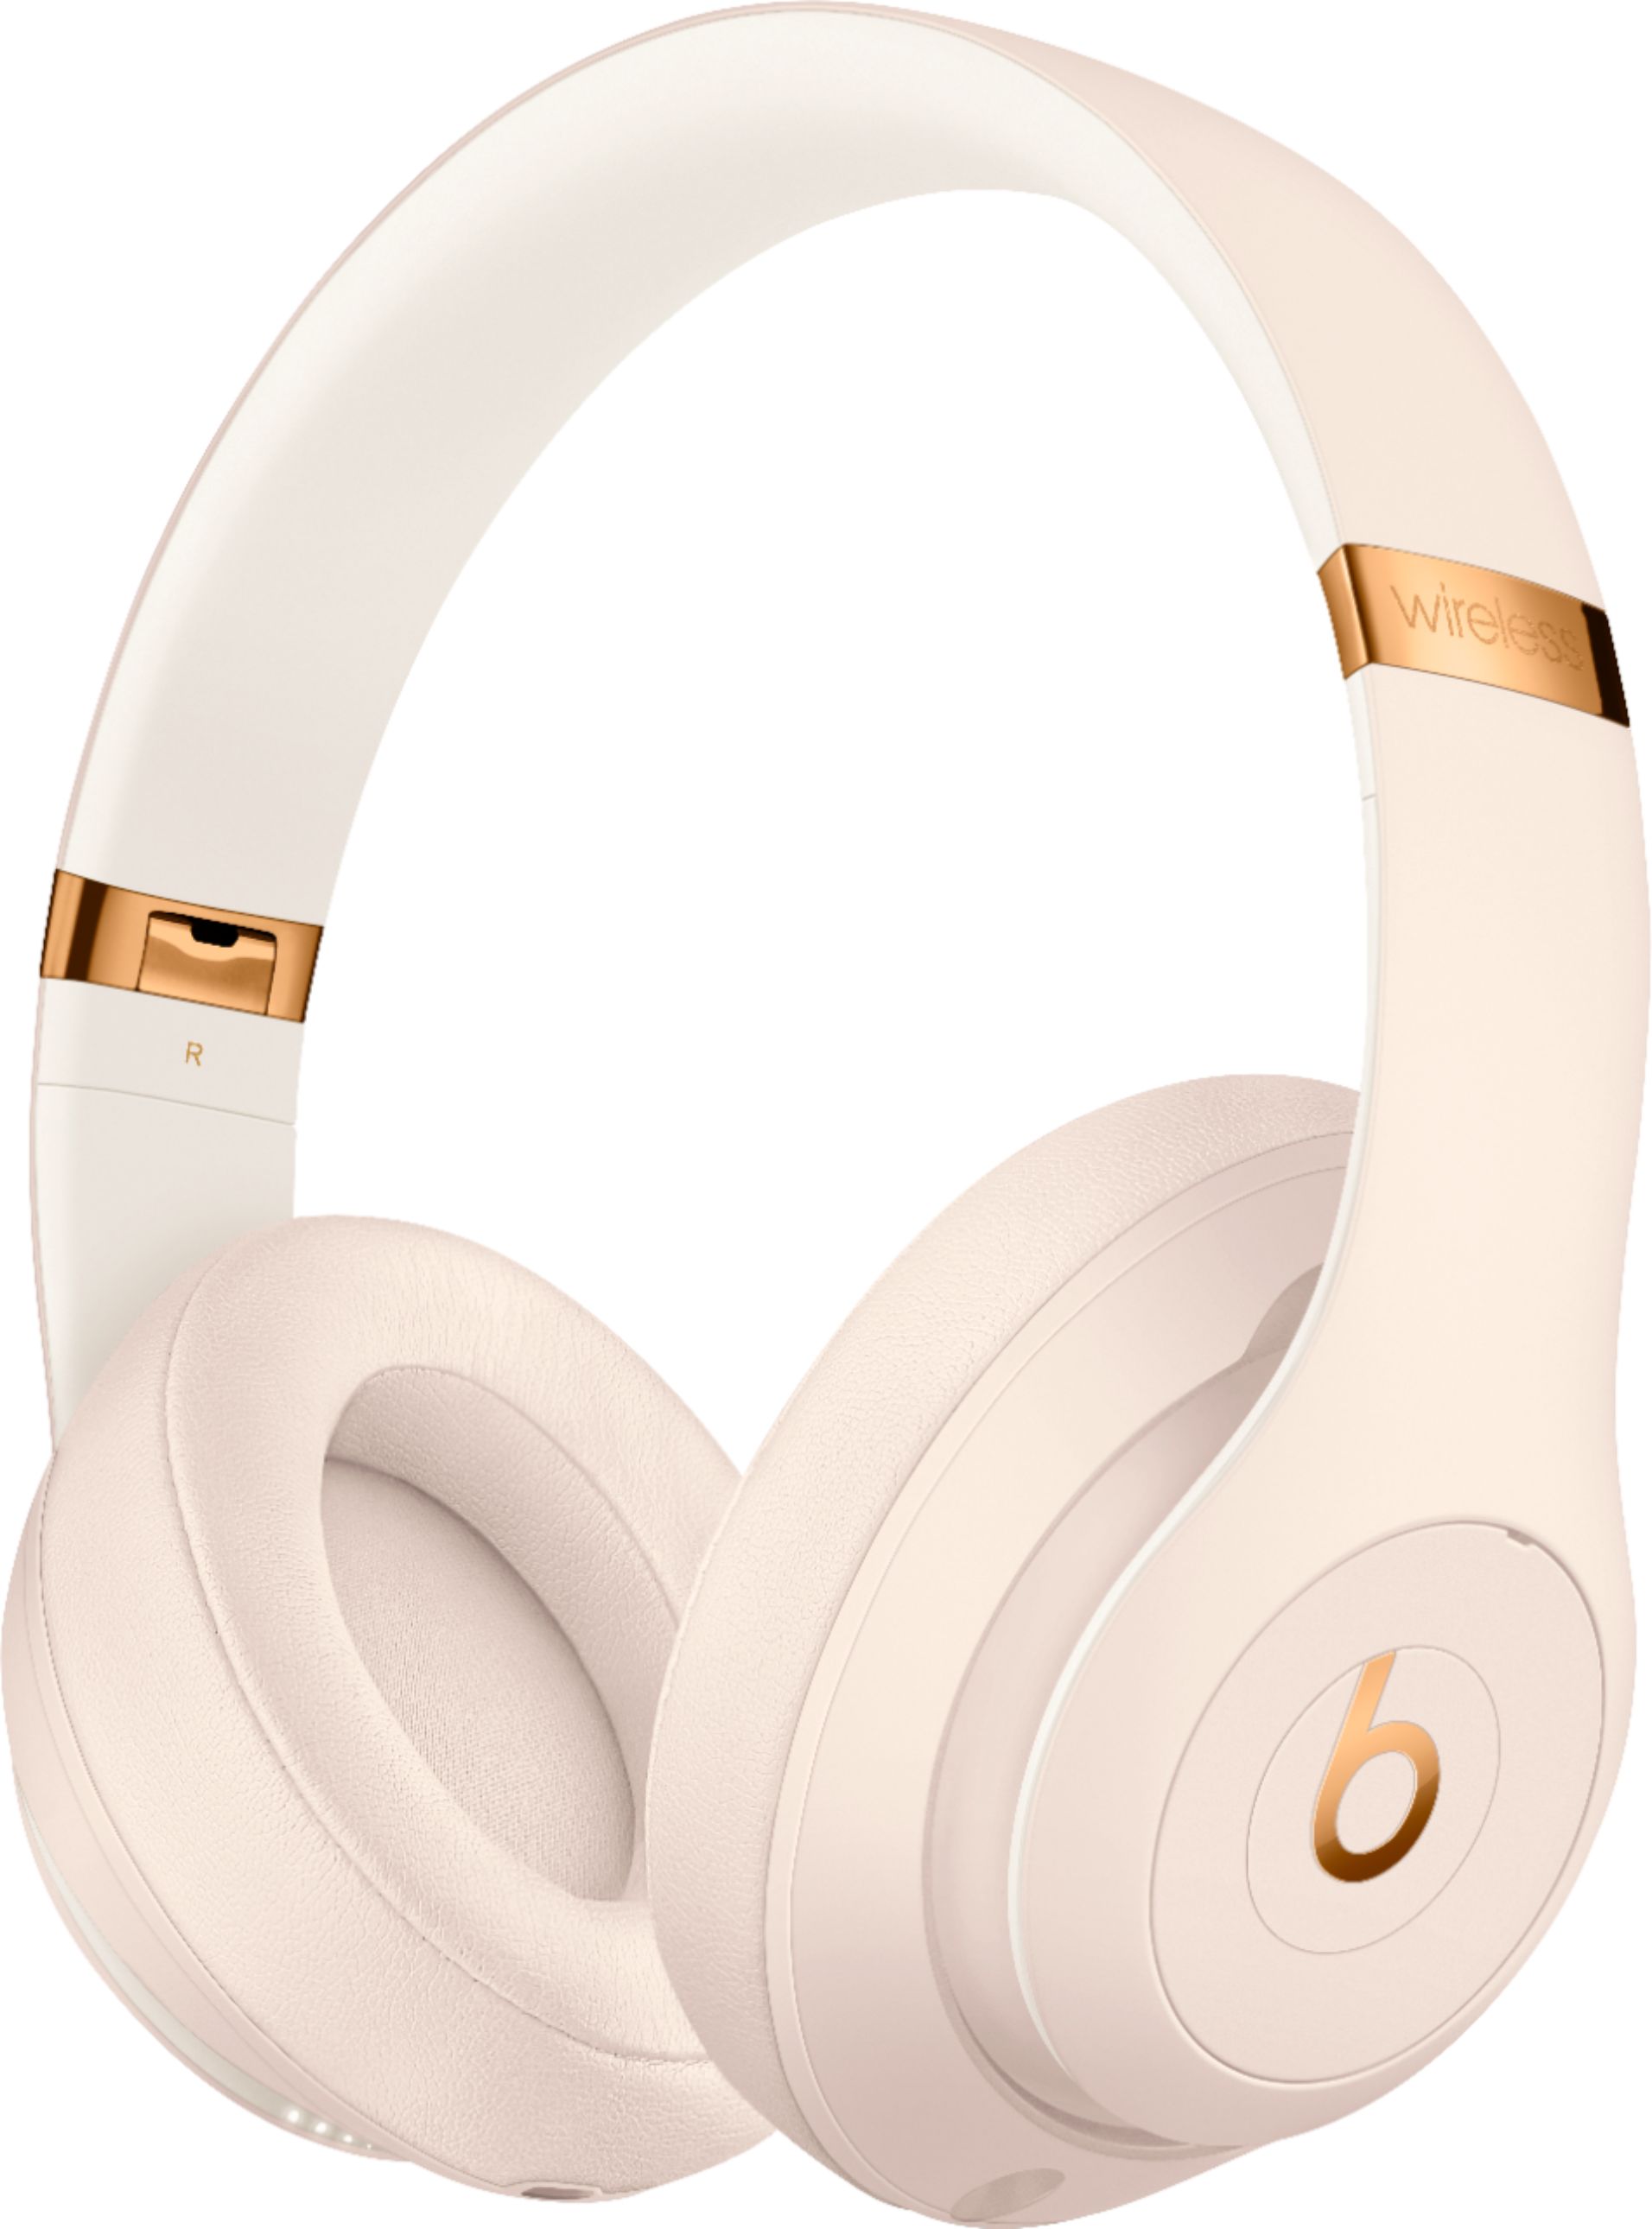 Beats by Dr. Dre Solo3 Wireless On the Ear Headphones - Rose Gold (READ)  190198105455